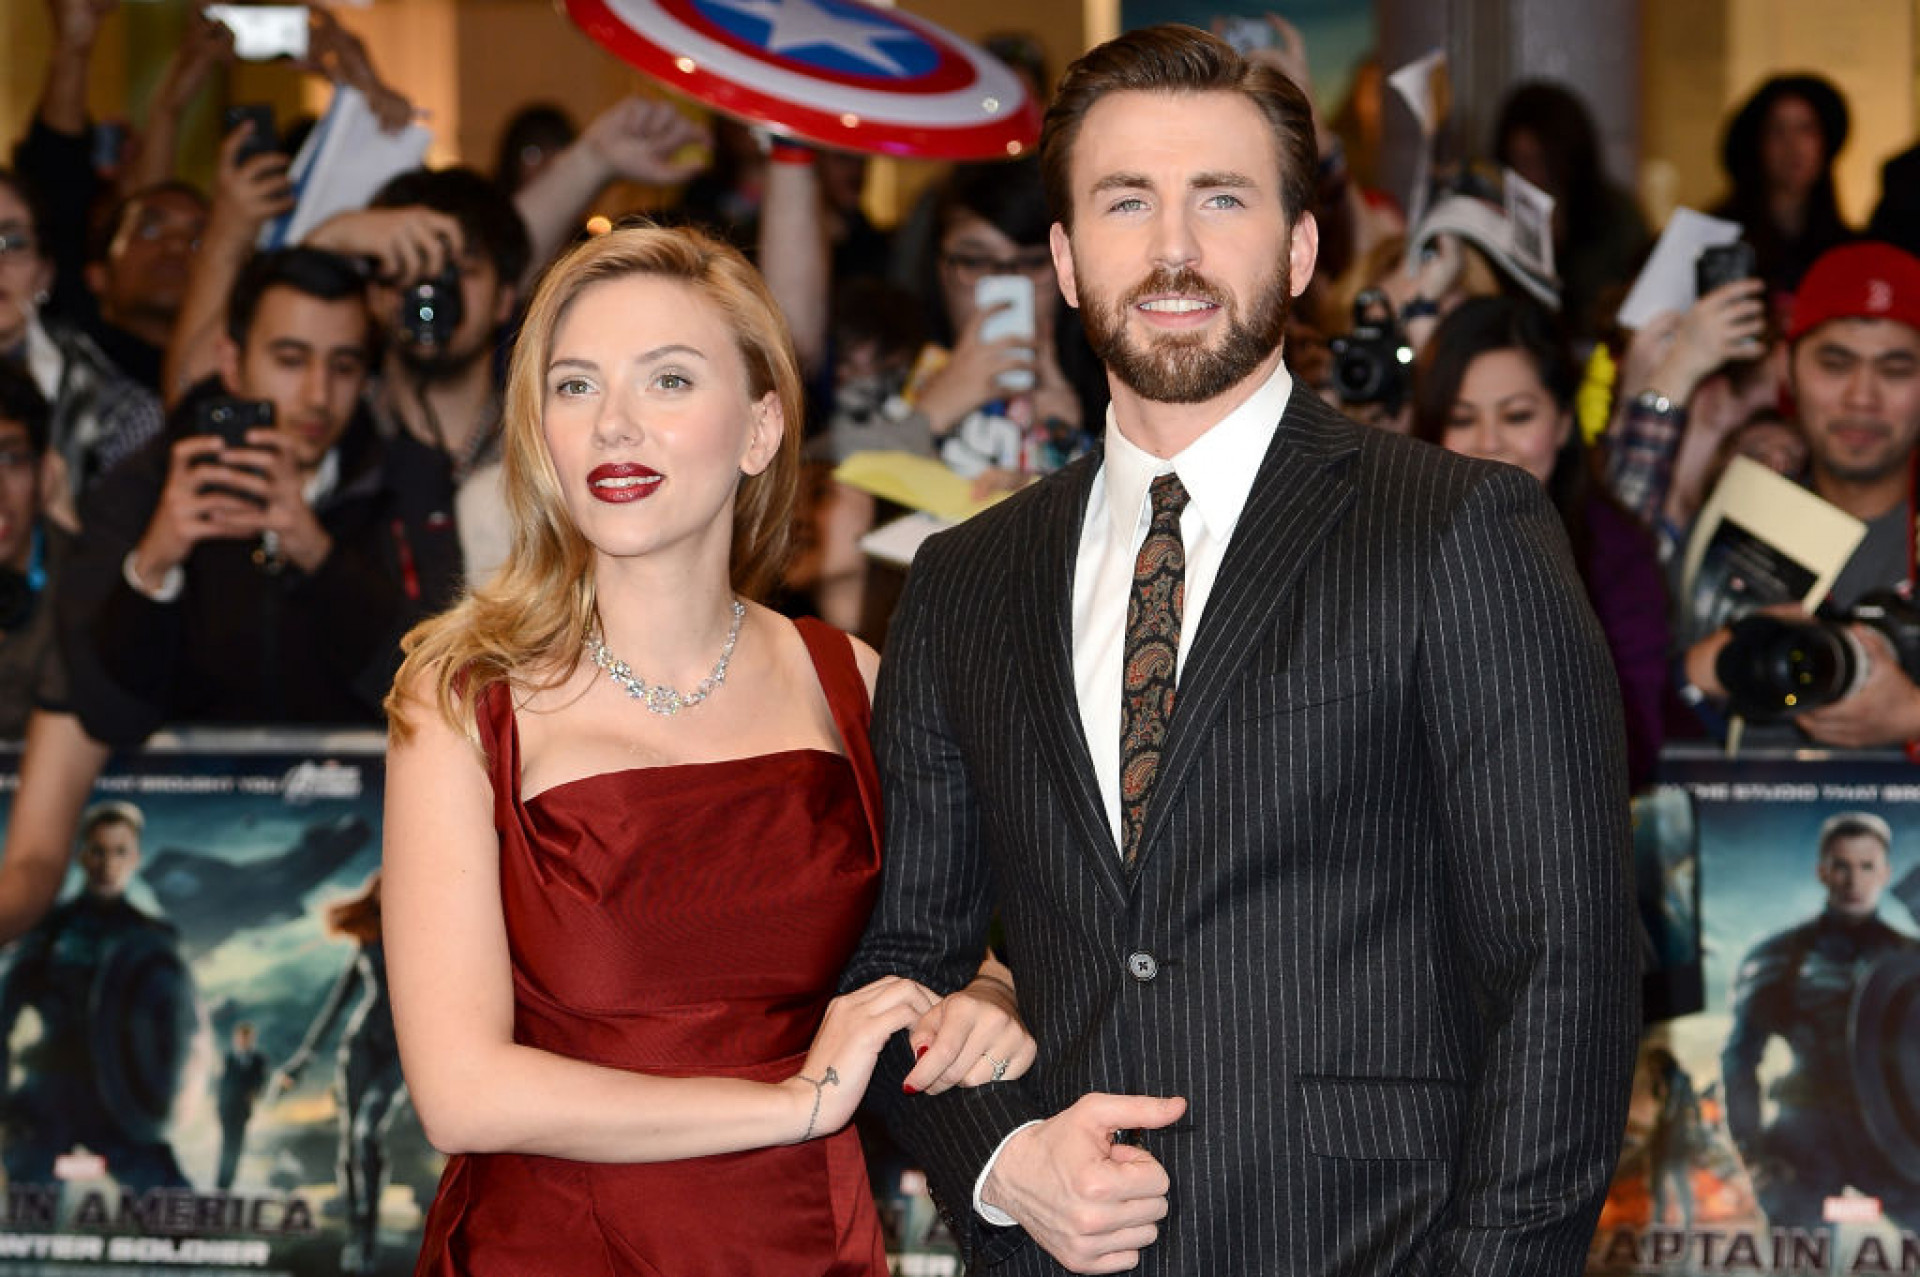 Scarlett-Johansson-and-Chris-Evans-on-March-20-2014-at-the-premiere-of-Captain-America-The-Winter-Soldier